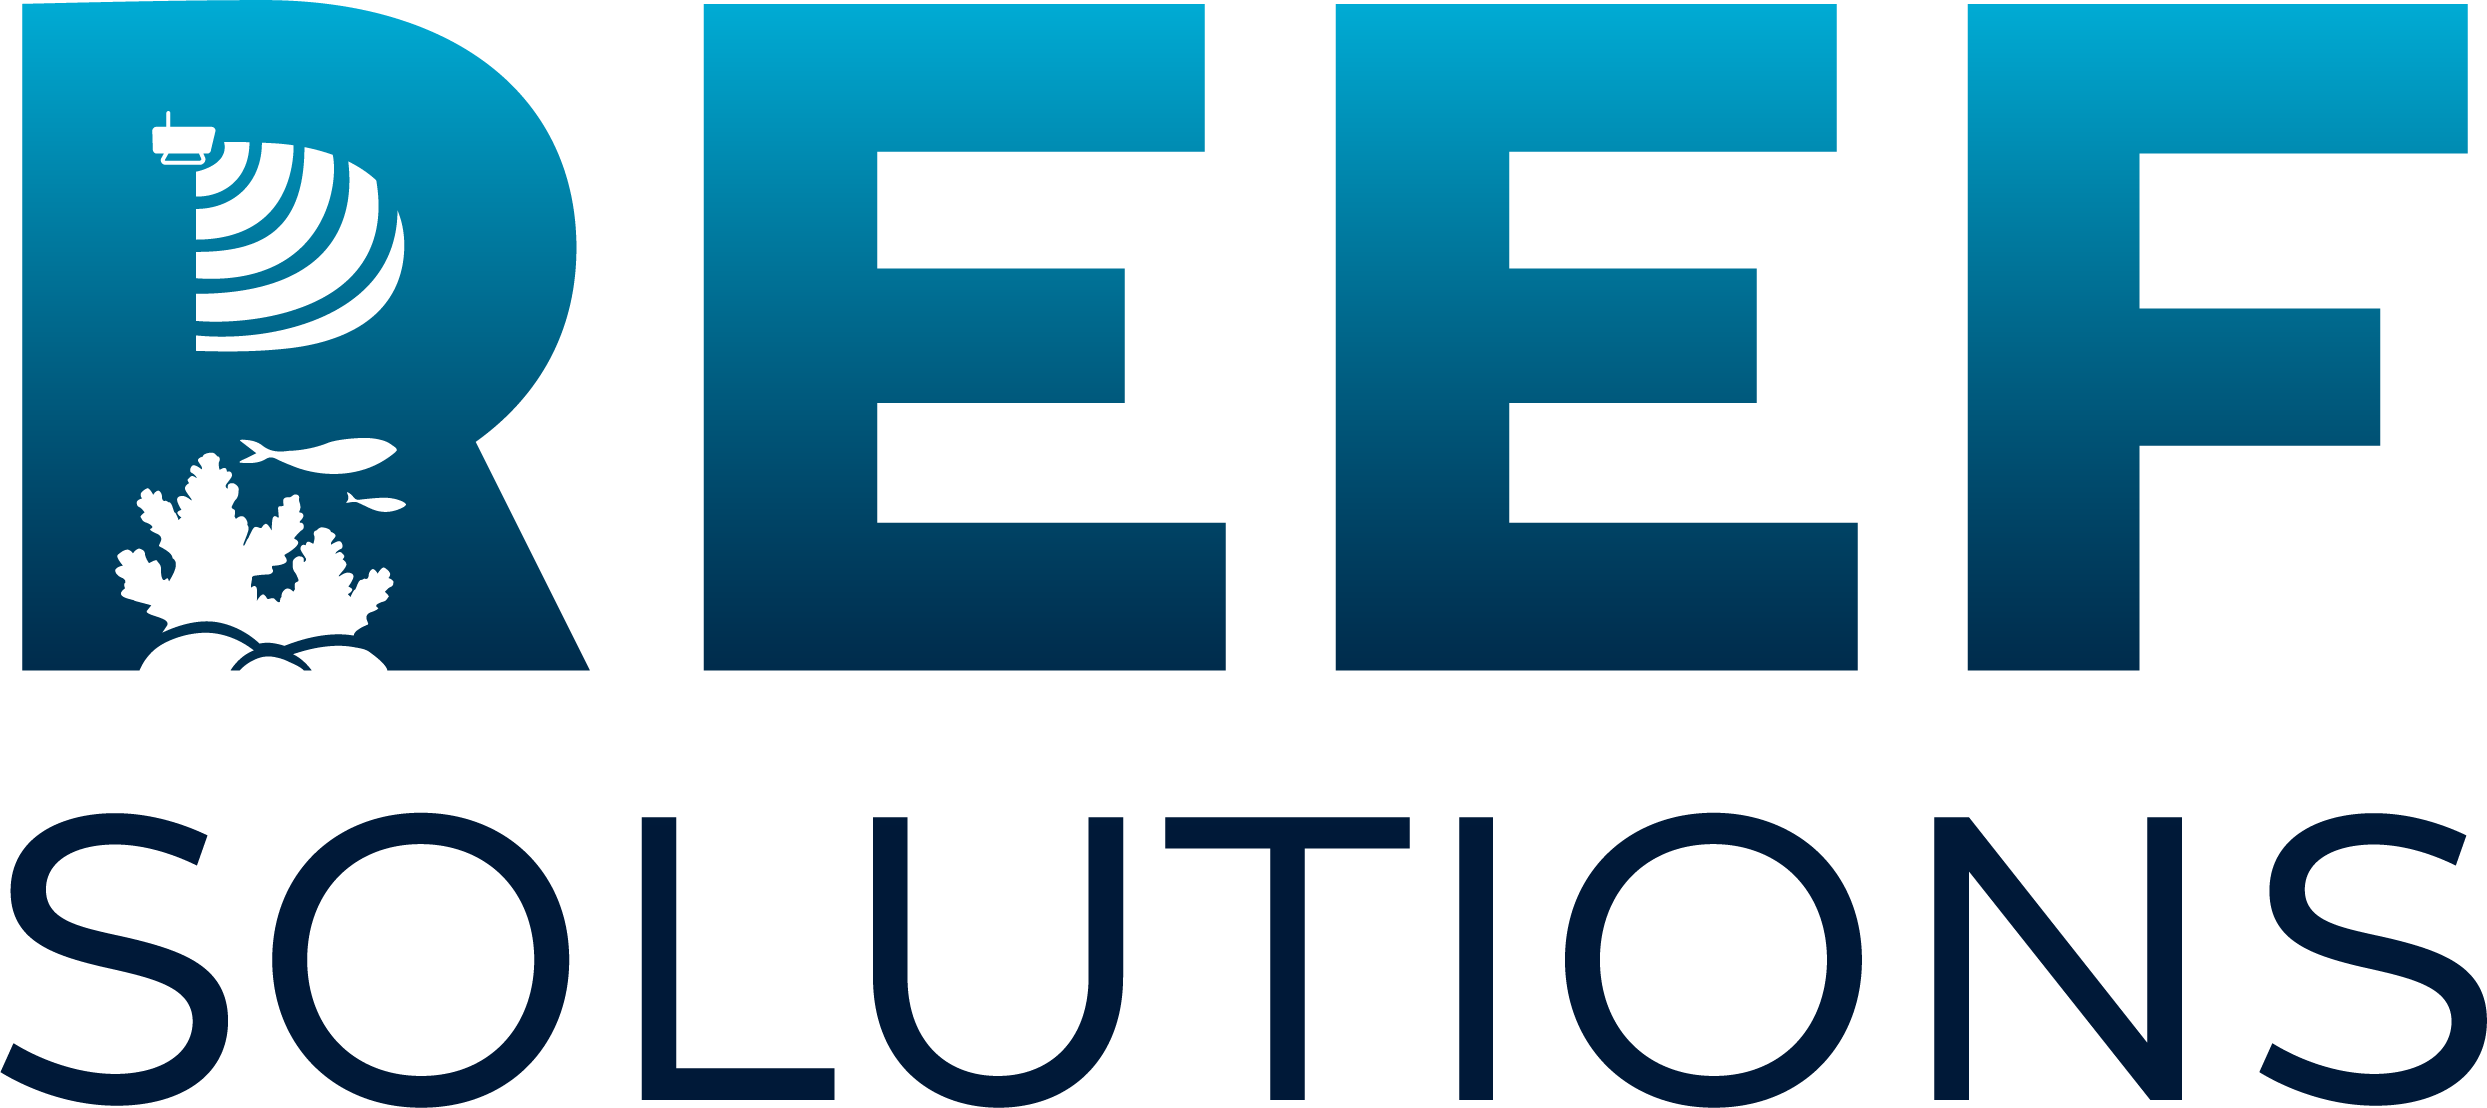 Reef Solutions